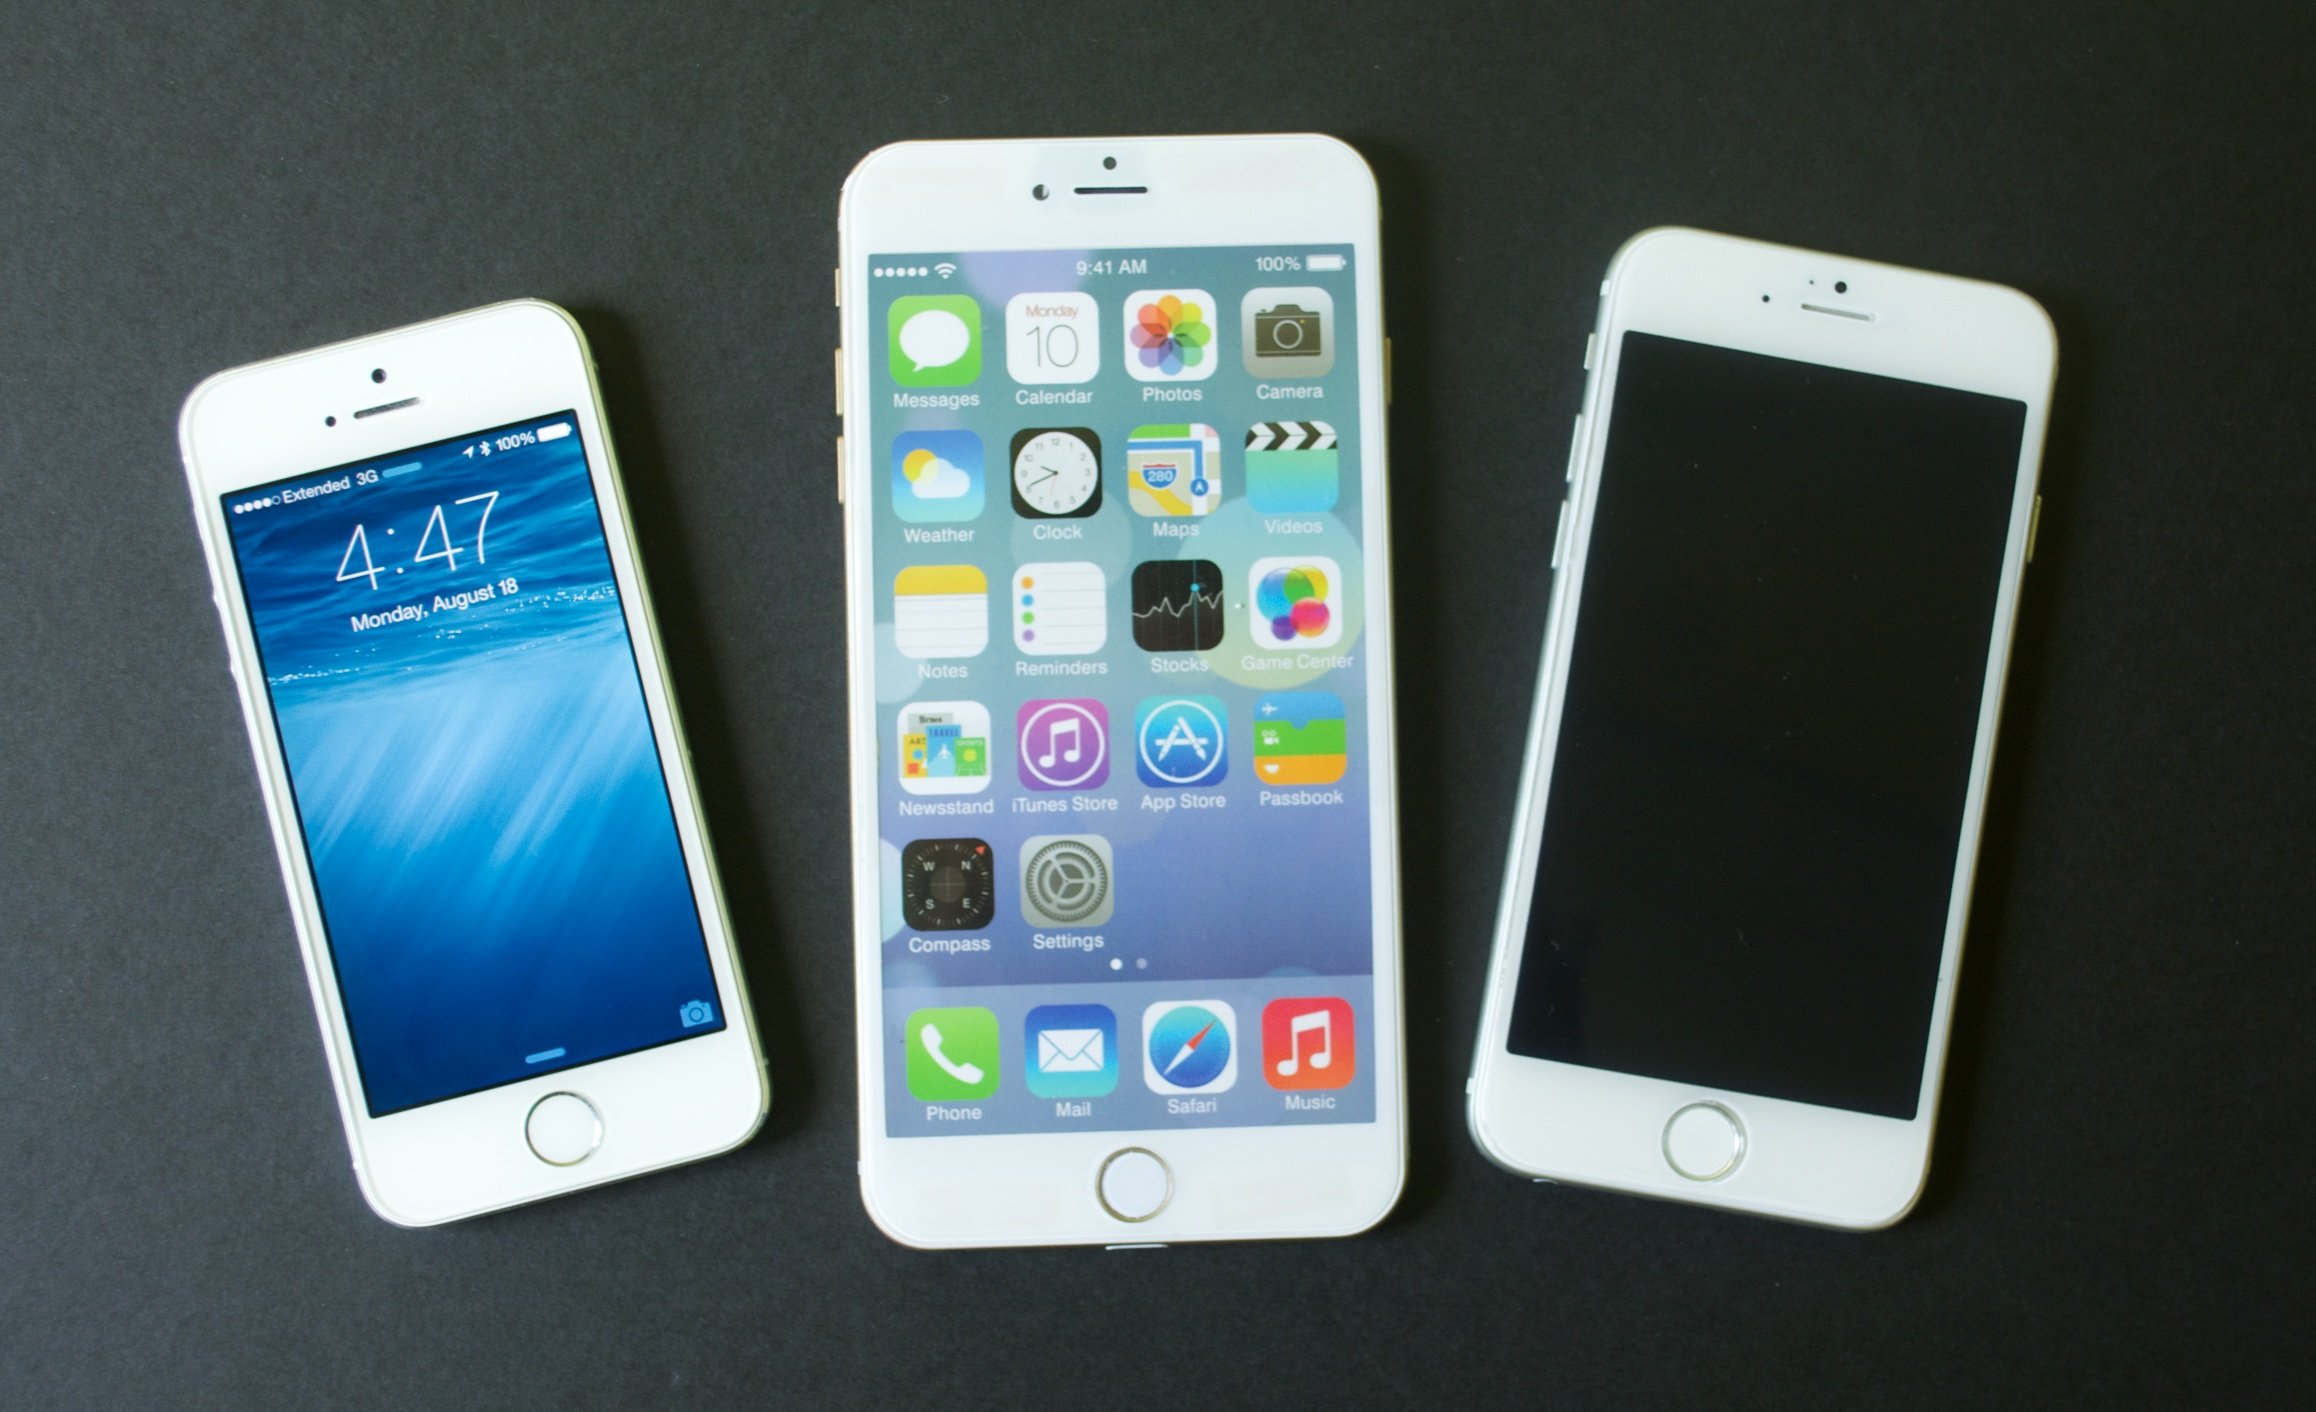 prototype speer Haas iPhone 6 vs iPhone 5s: 5 Things to Know About the Big iPhone